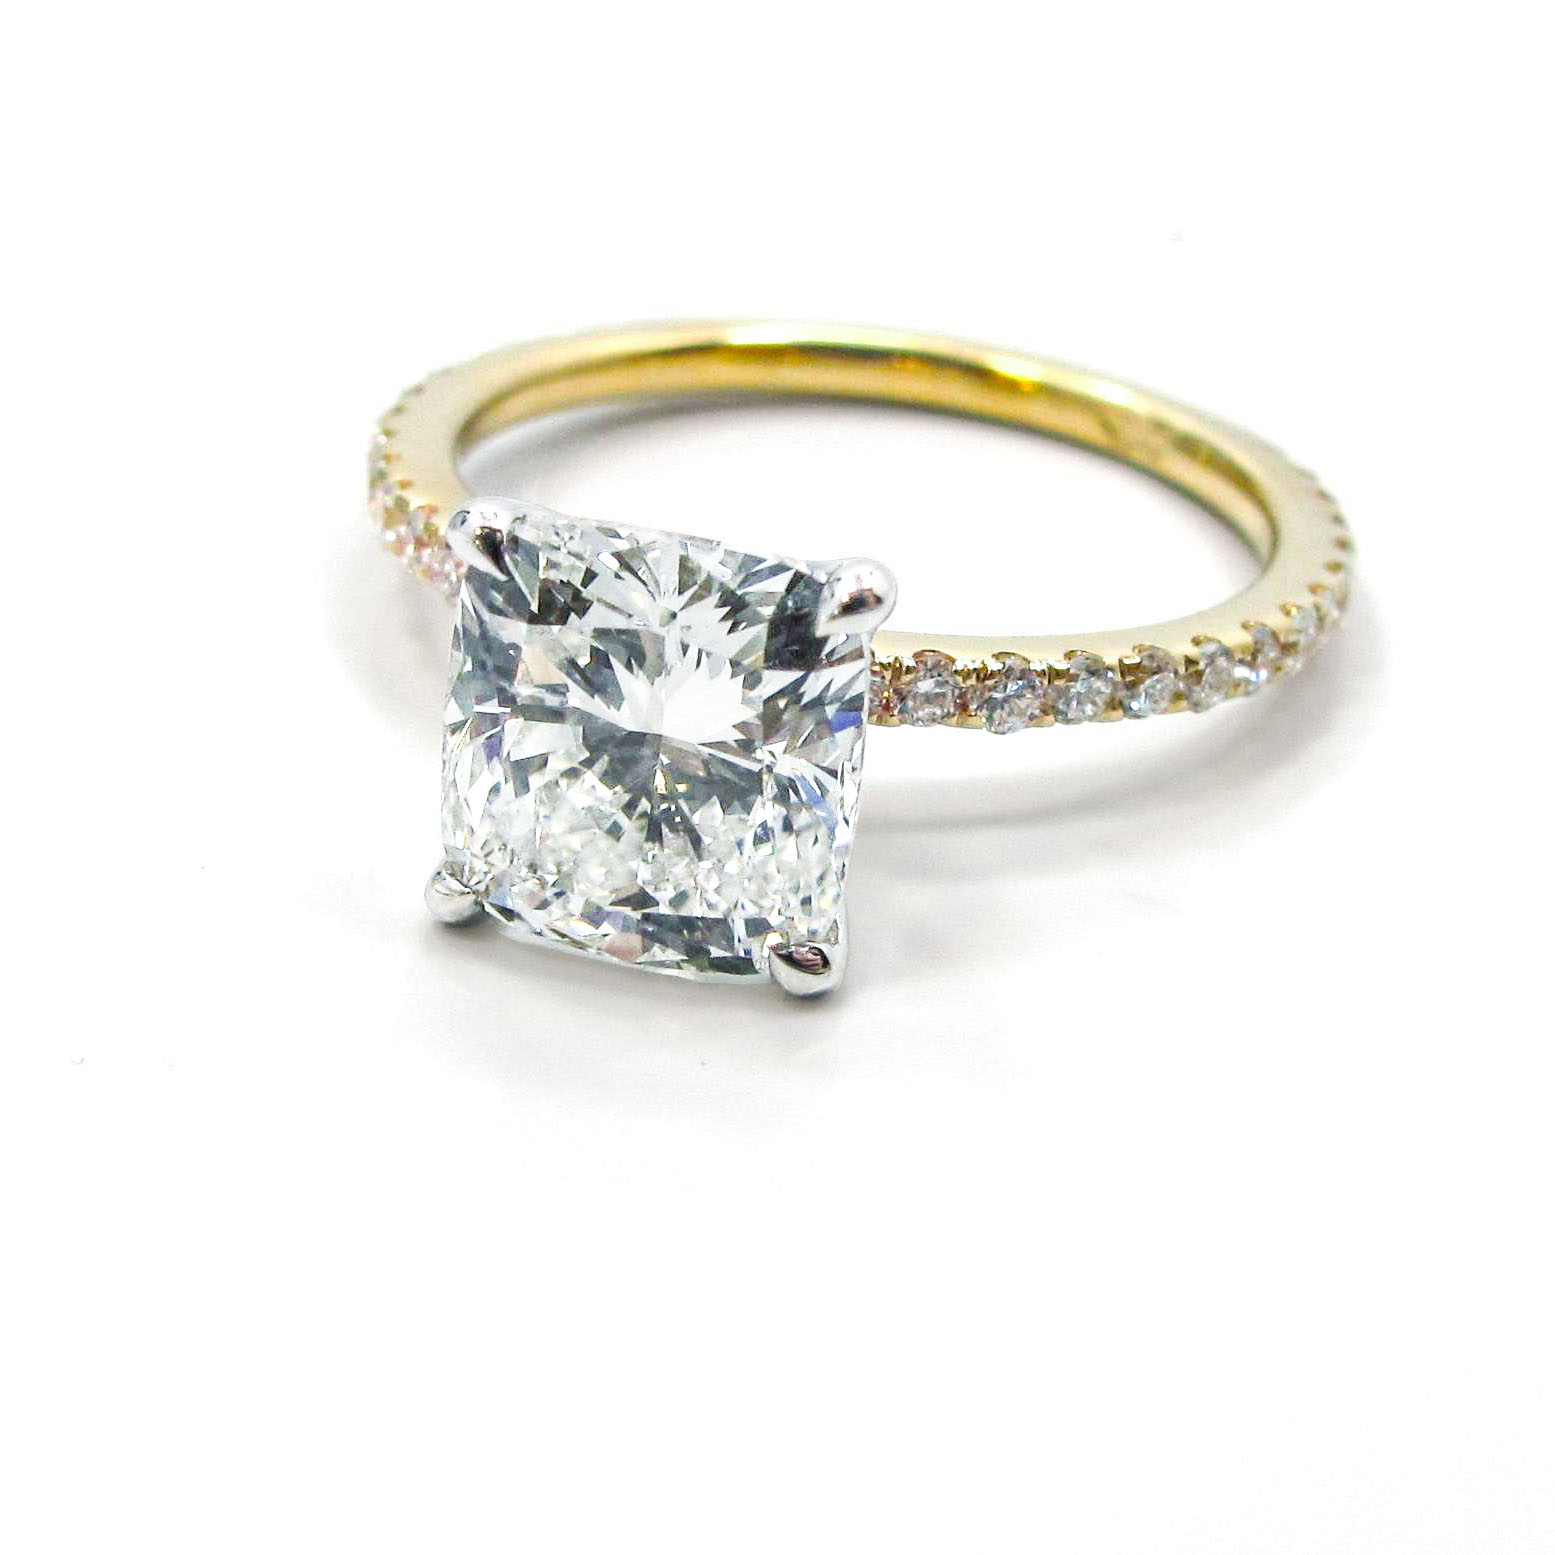 Cushion Diamond Engagement Ring in Yellow Gold